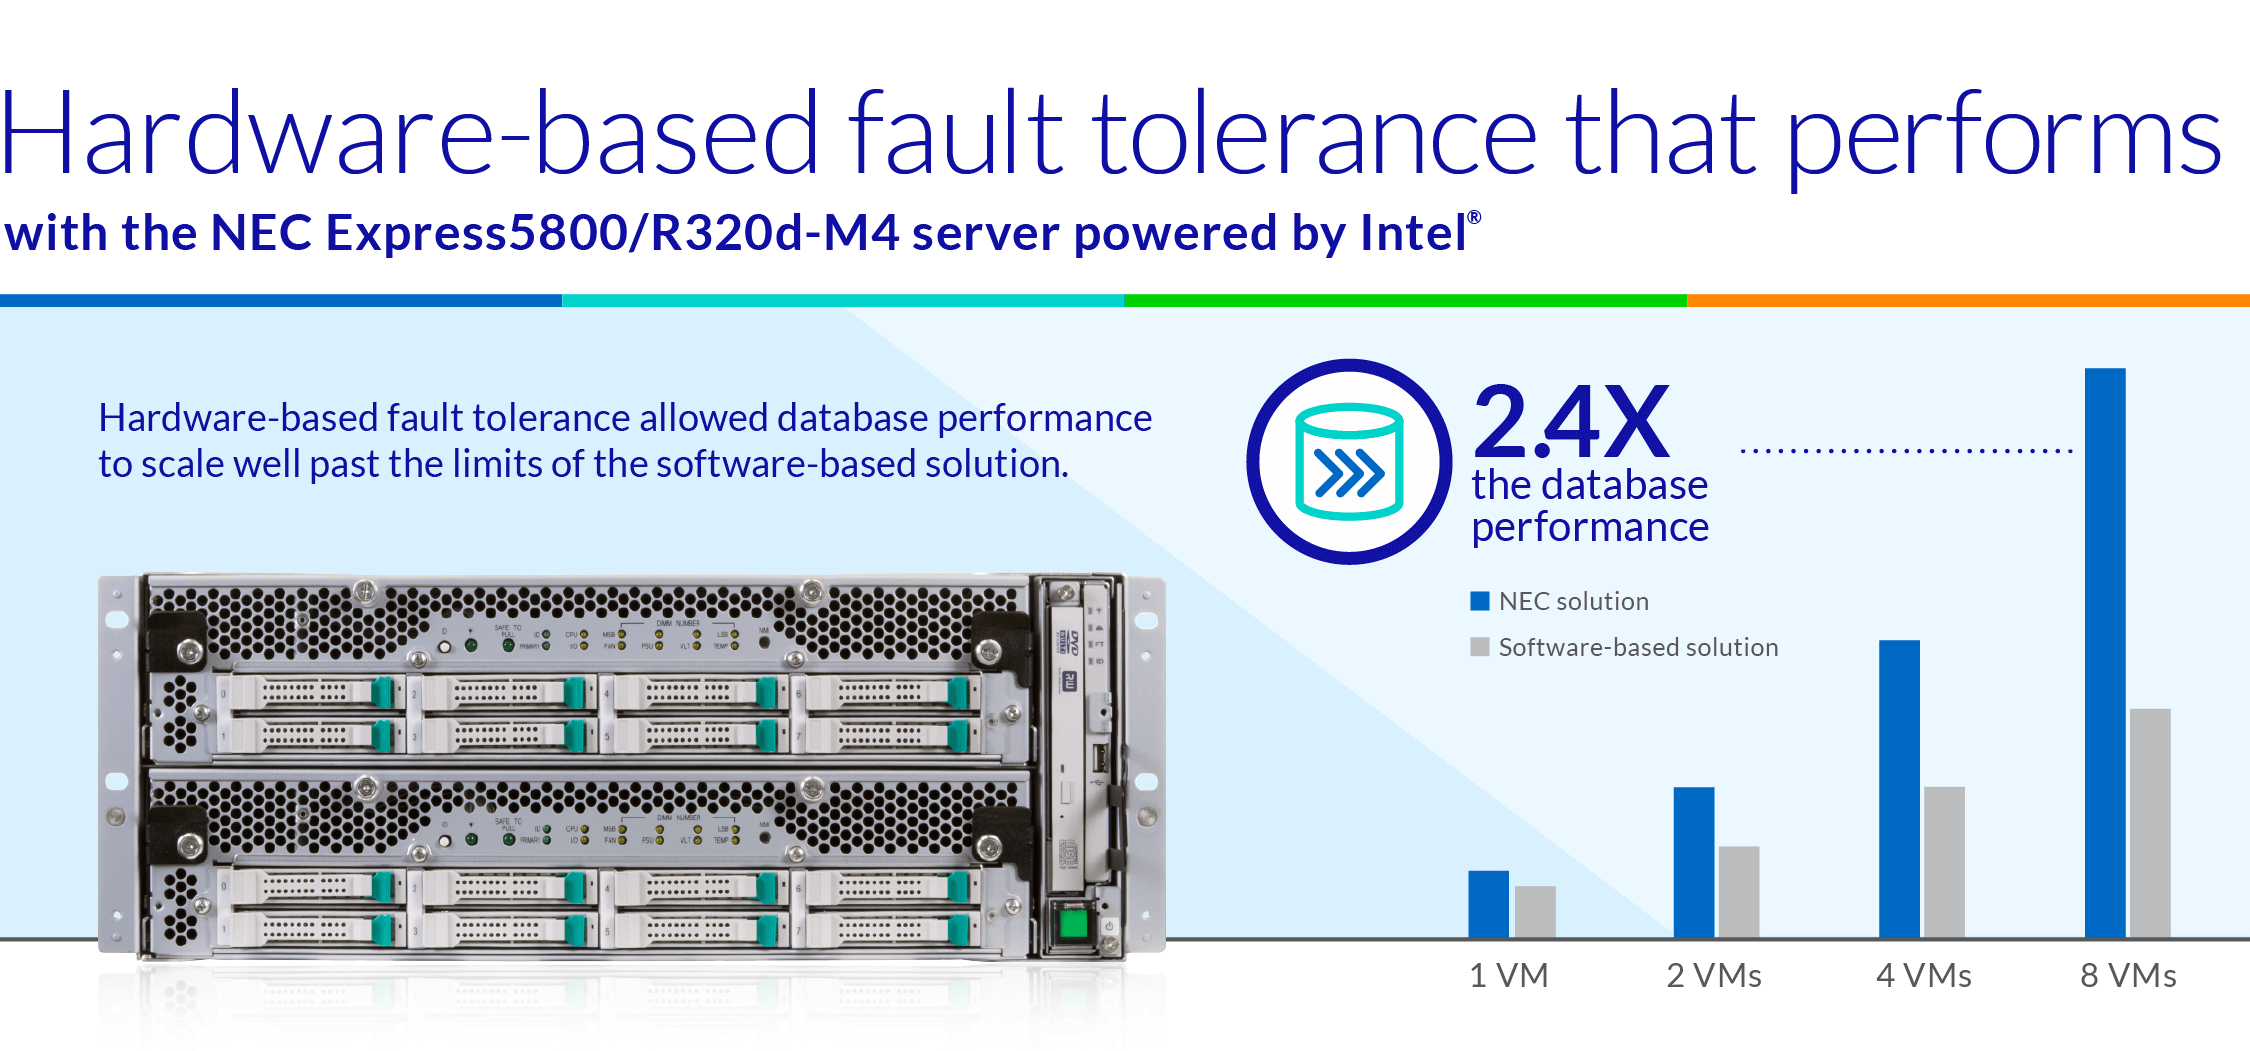 FAULT TOLERANCE PERFORMANCE AND SCALABILITY COMPARISON: NEC HARDWARE-BASED FT VS.